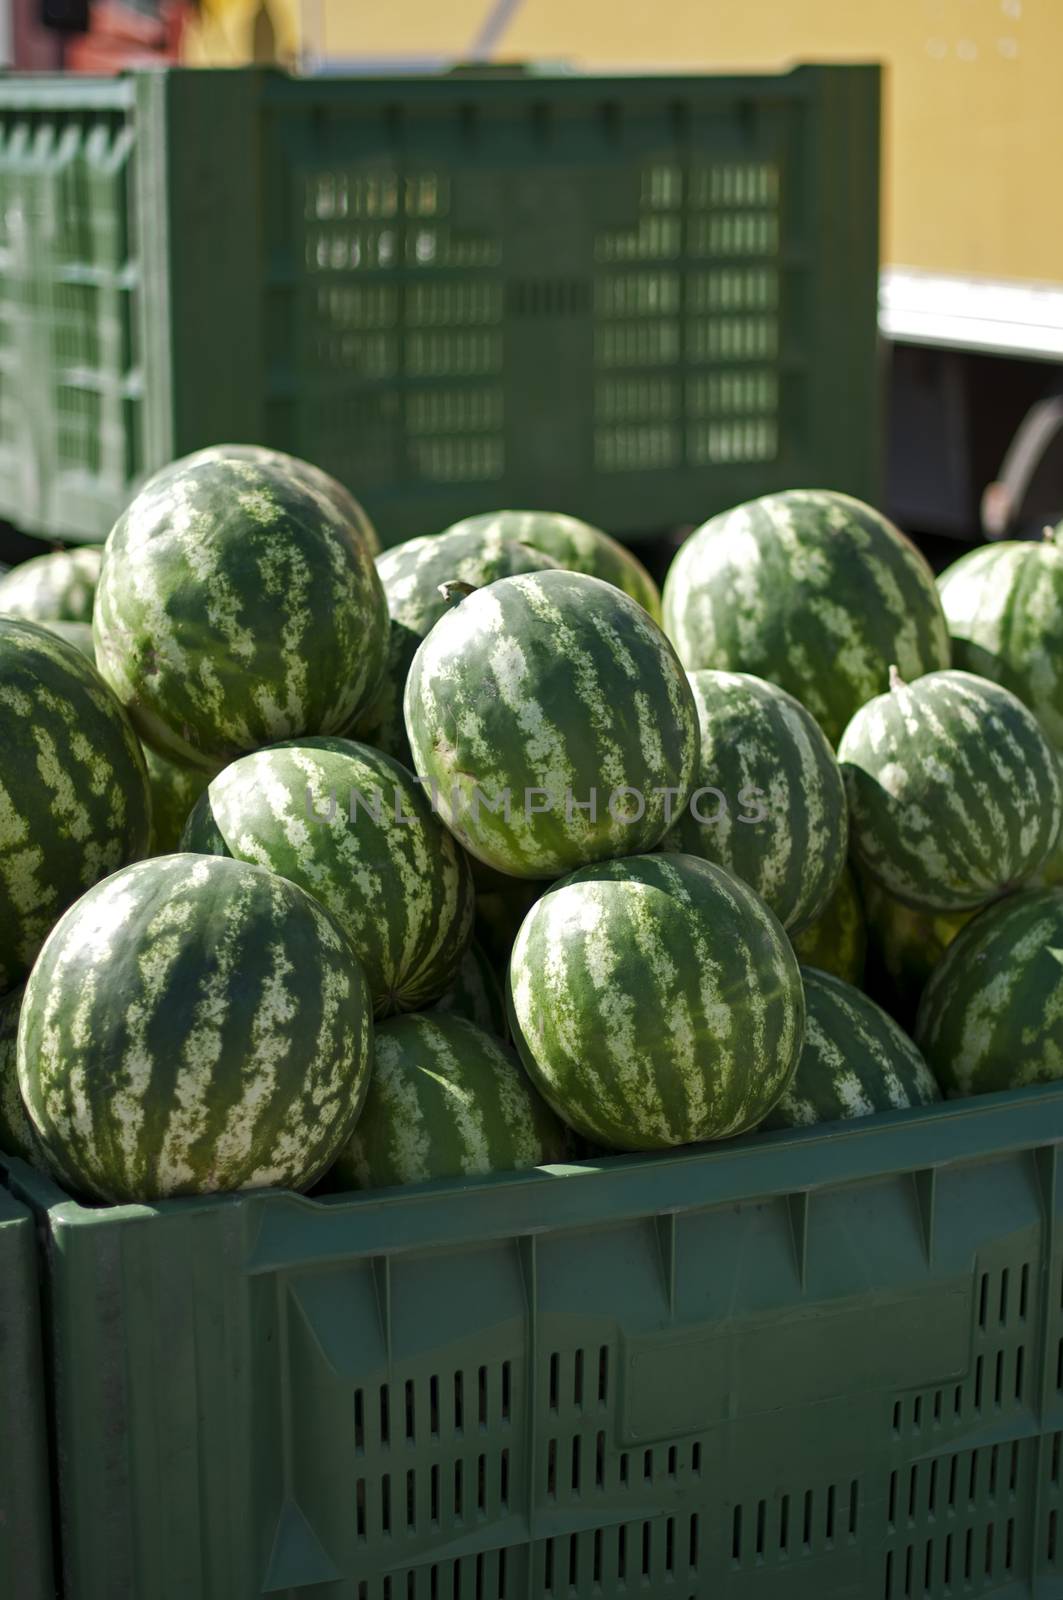 Watermelons in large crates in Wholesale market